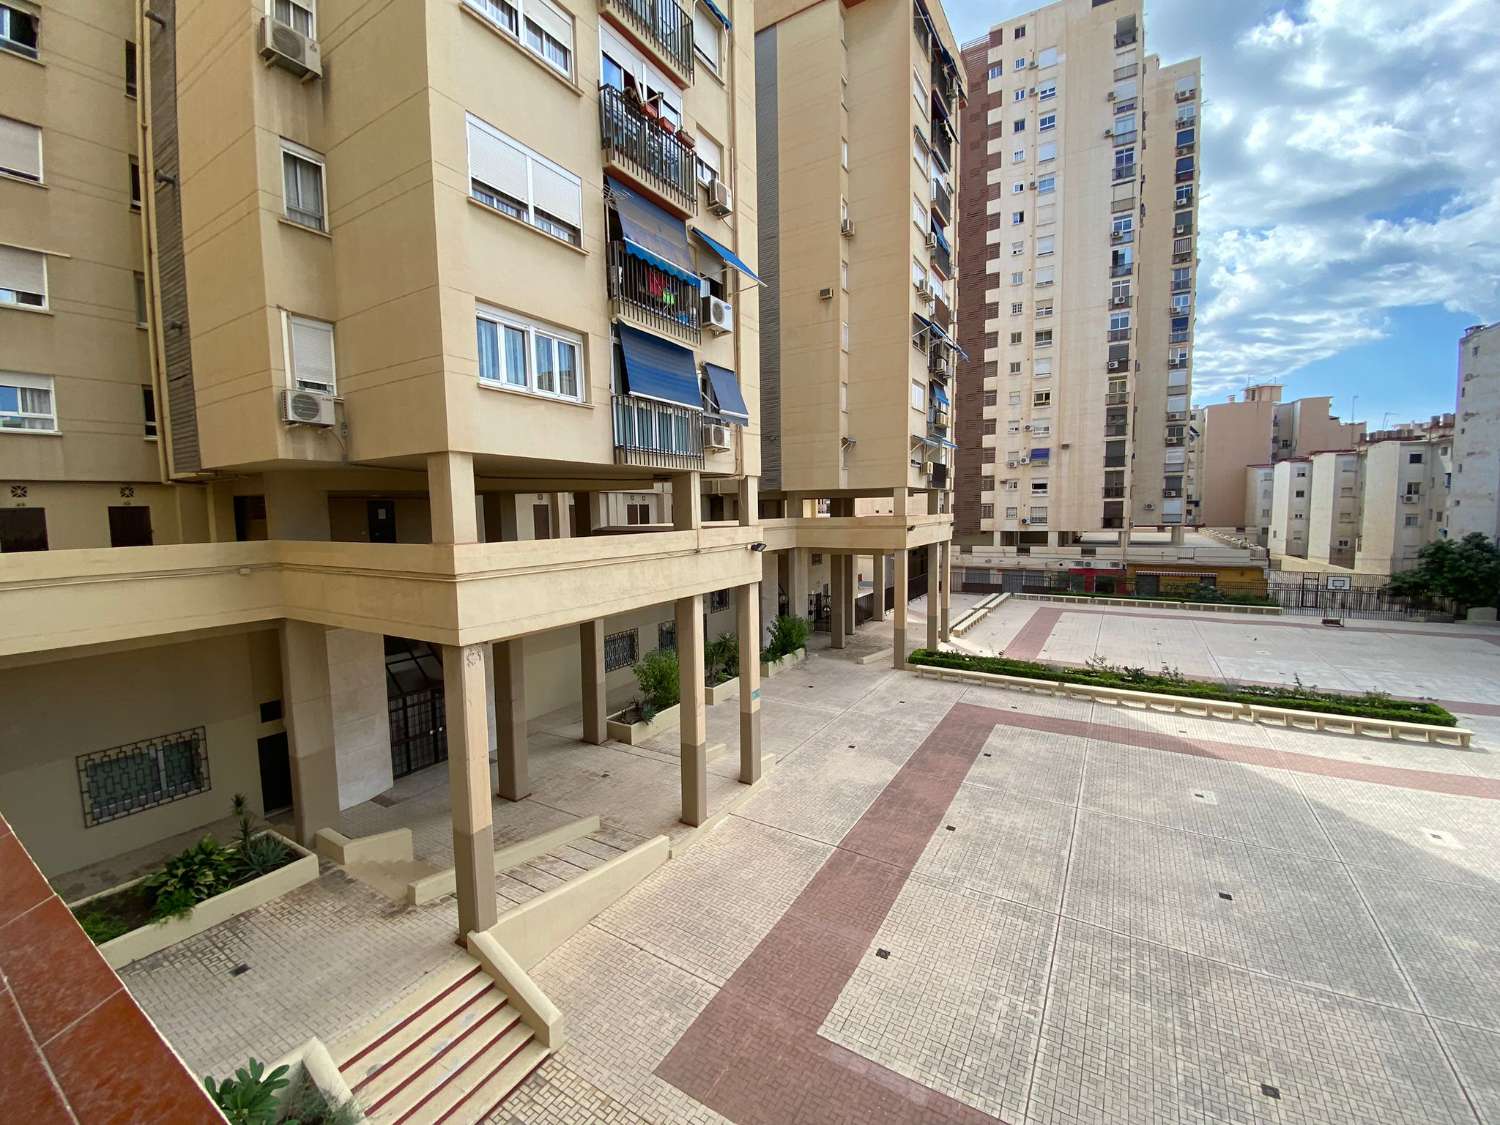 Spacious apartment with 4 bedrooms and 2 bathrooms, garage and storage room.